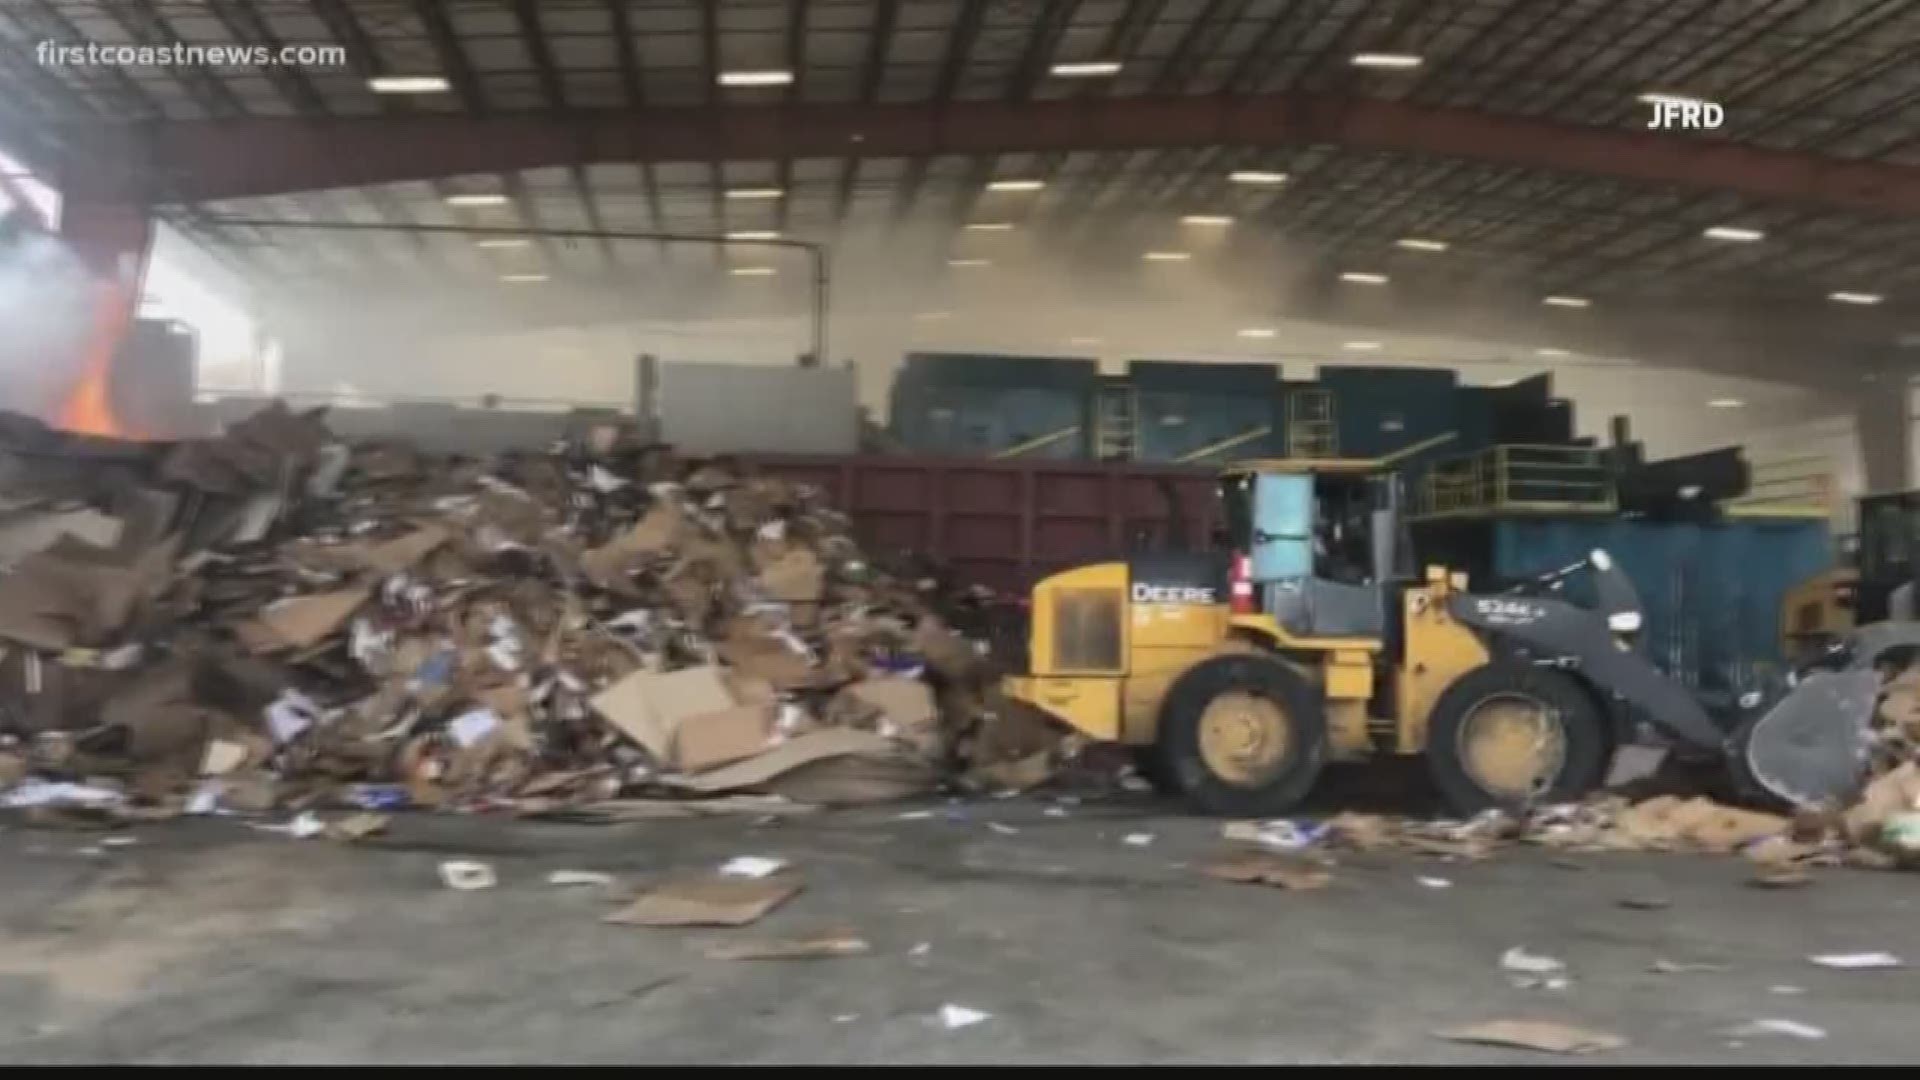 JFRD says a pile of cardboard caught fire at a recycling plant in the 1500 block of Beaver Street.